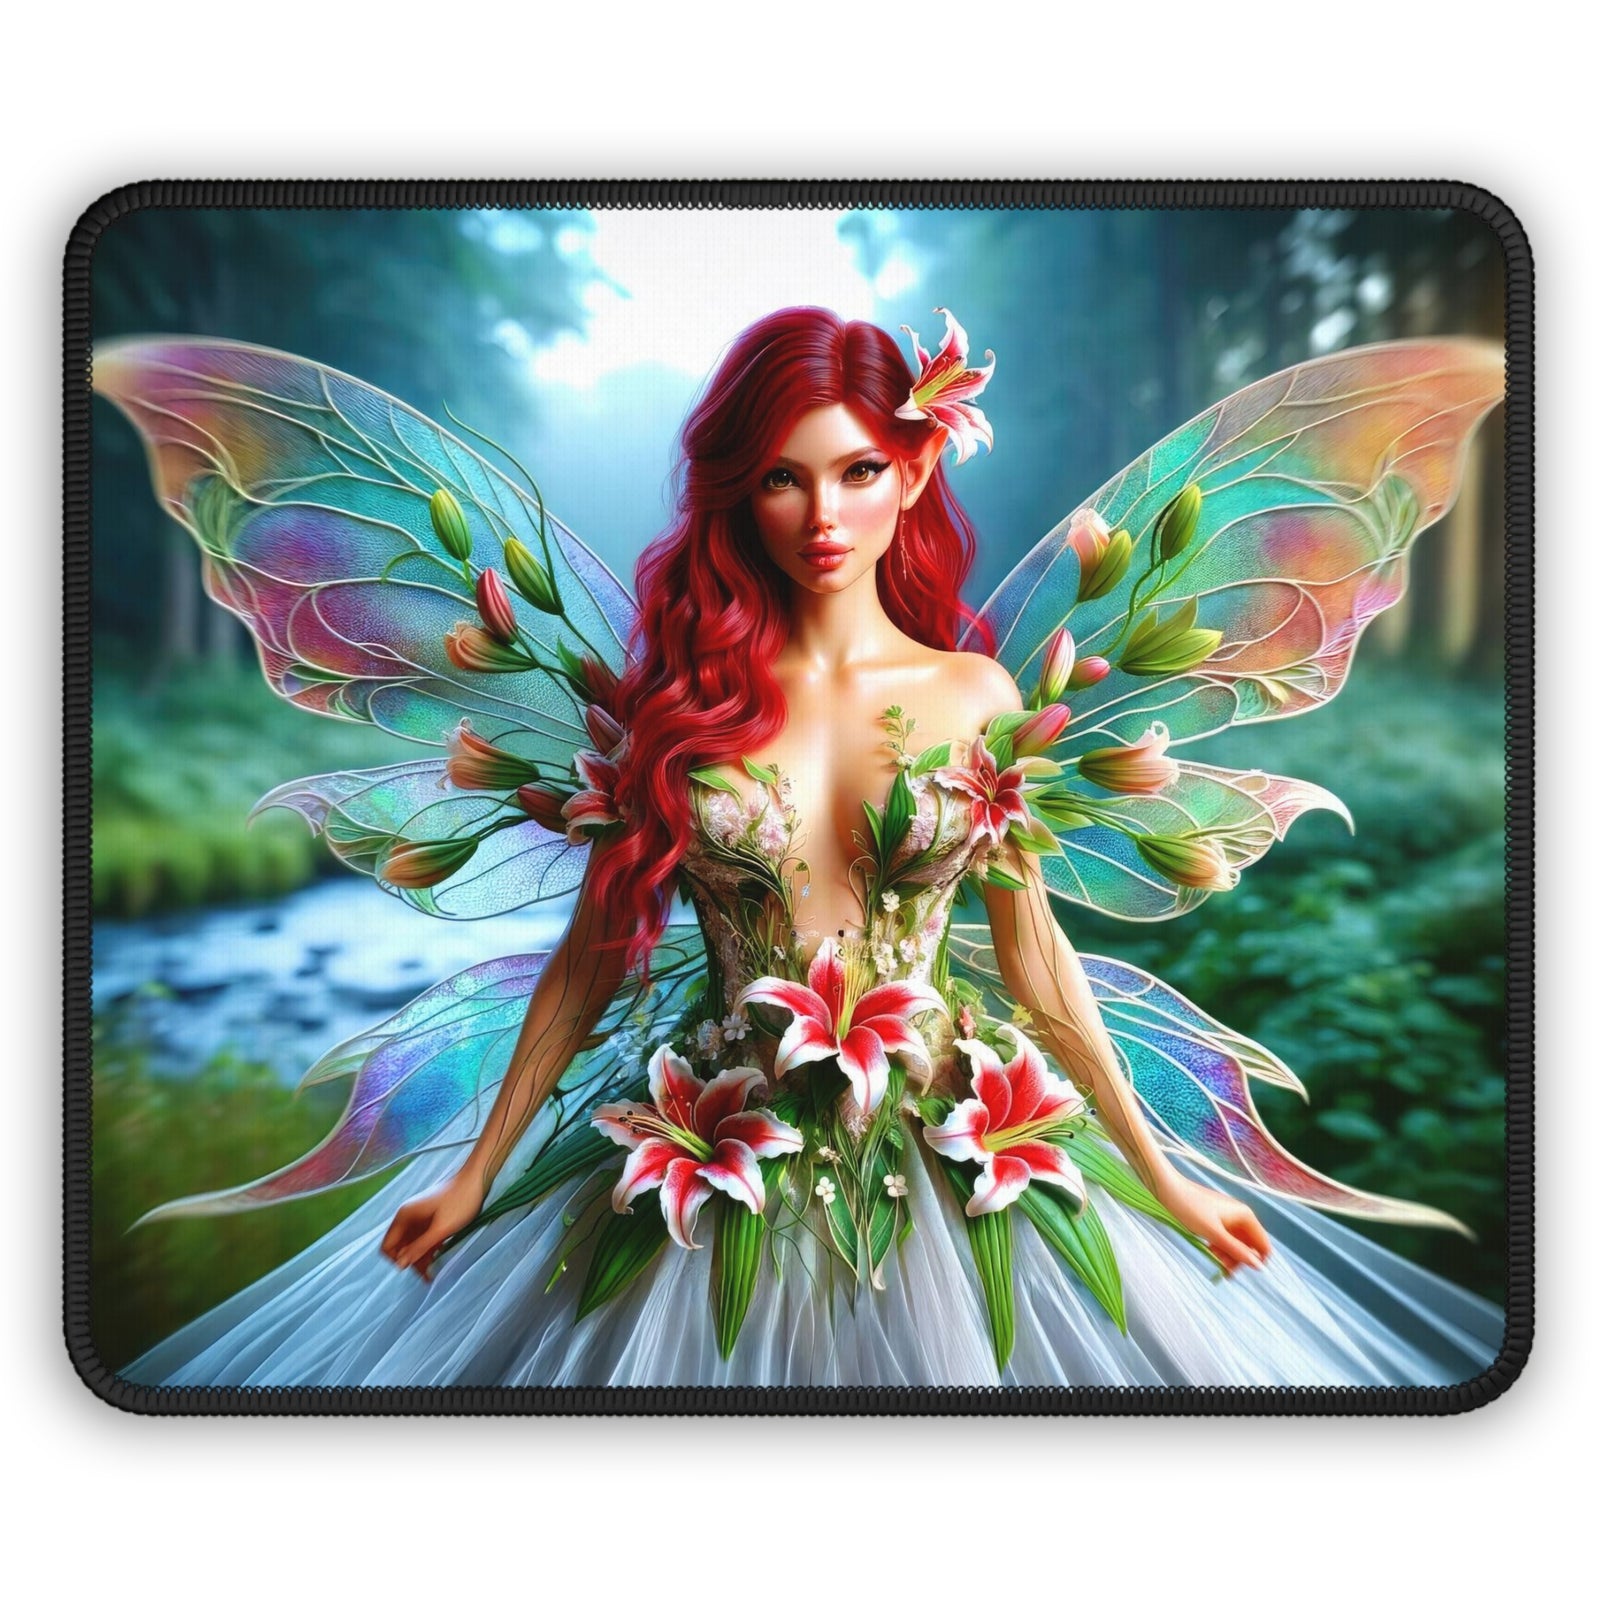 The Stargazer Fairy's Midsummer Night Dream Gaming Mouse Pad